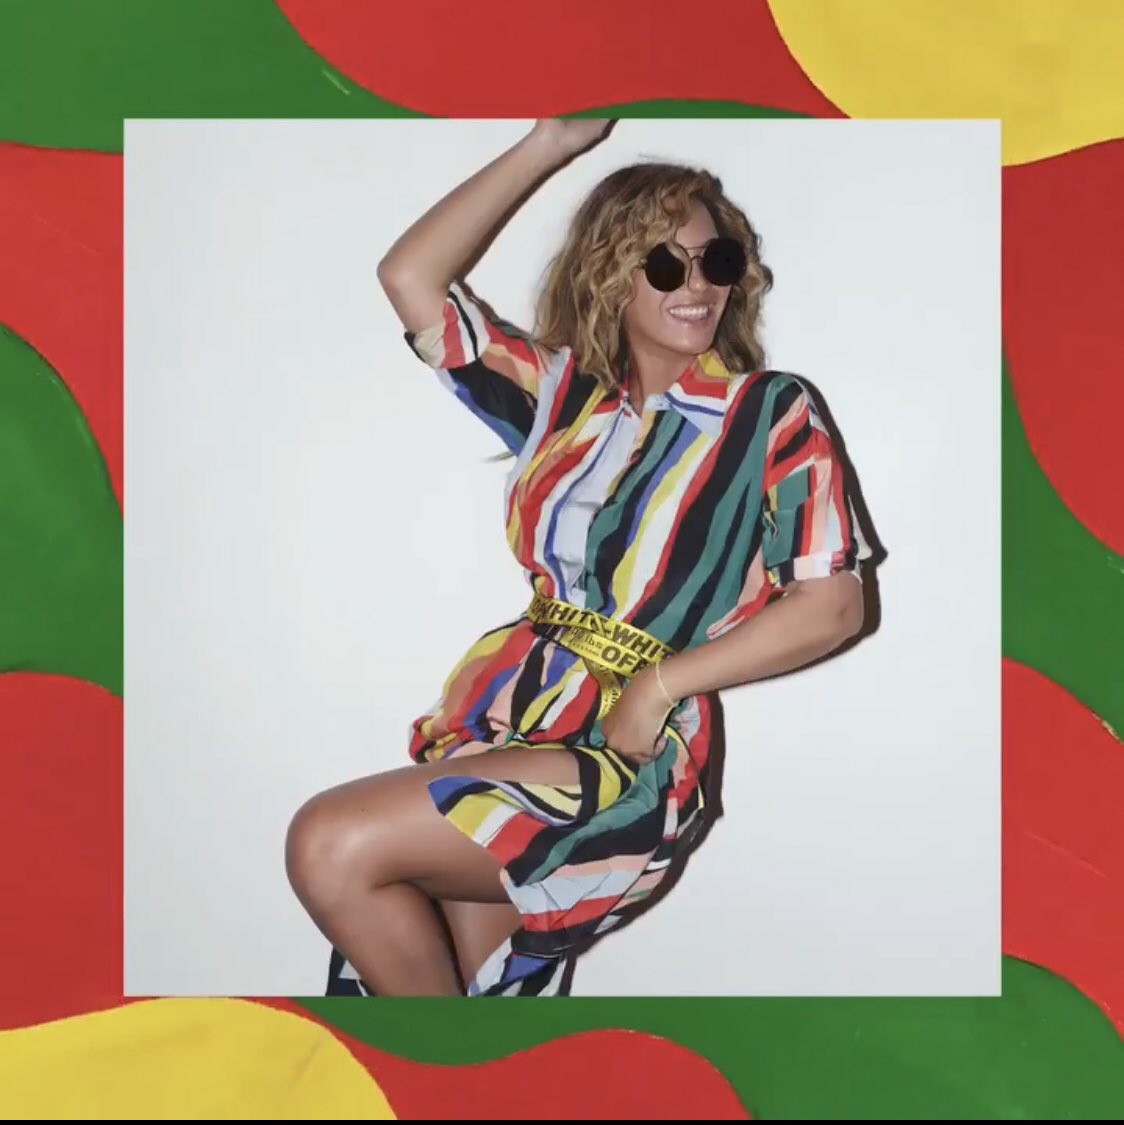 Beyoncé in 2017 collabed with J Balvin on his song “Mi Gente” to raise money for relief in those affected in Hurricane Maria, including Mexico and Puerto Rico!